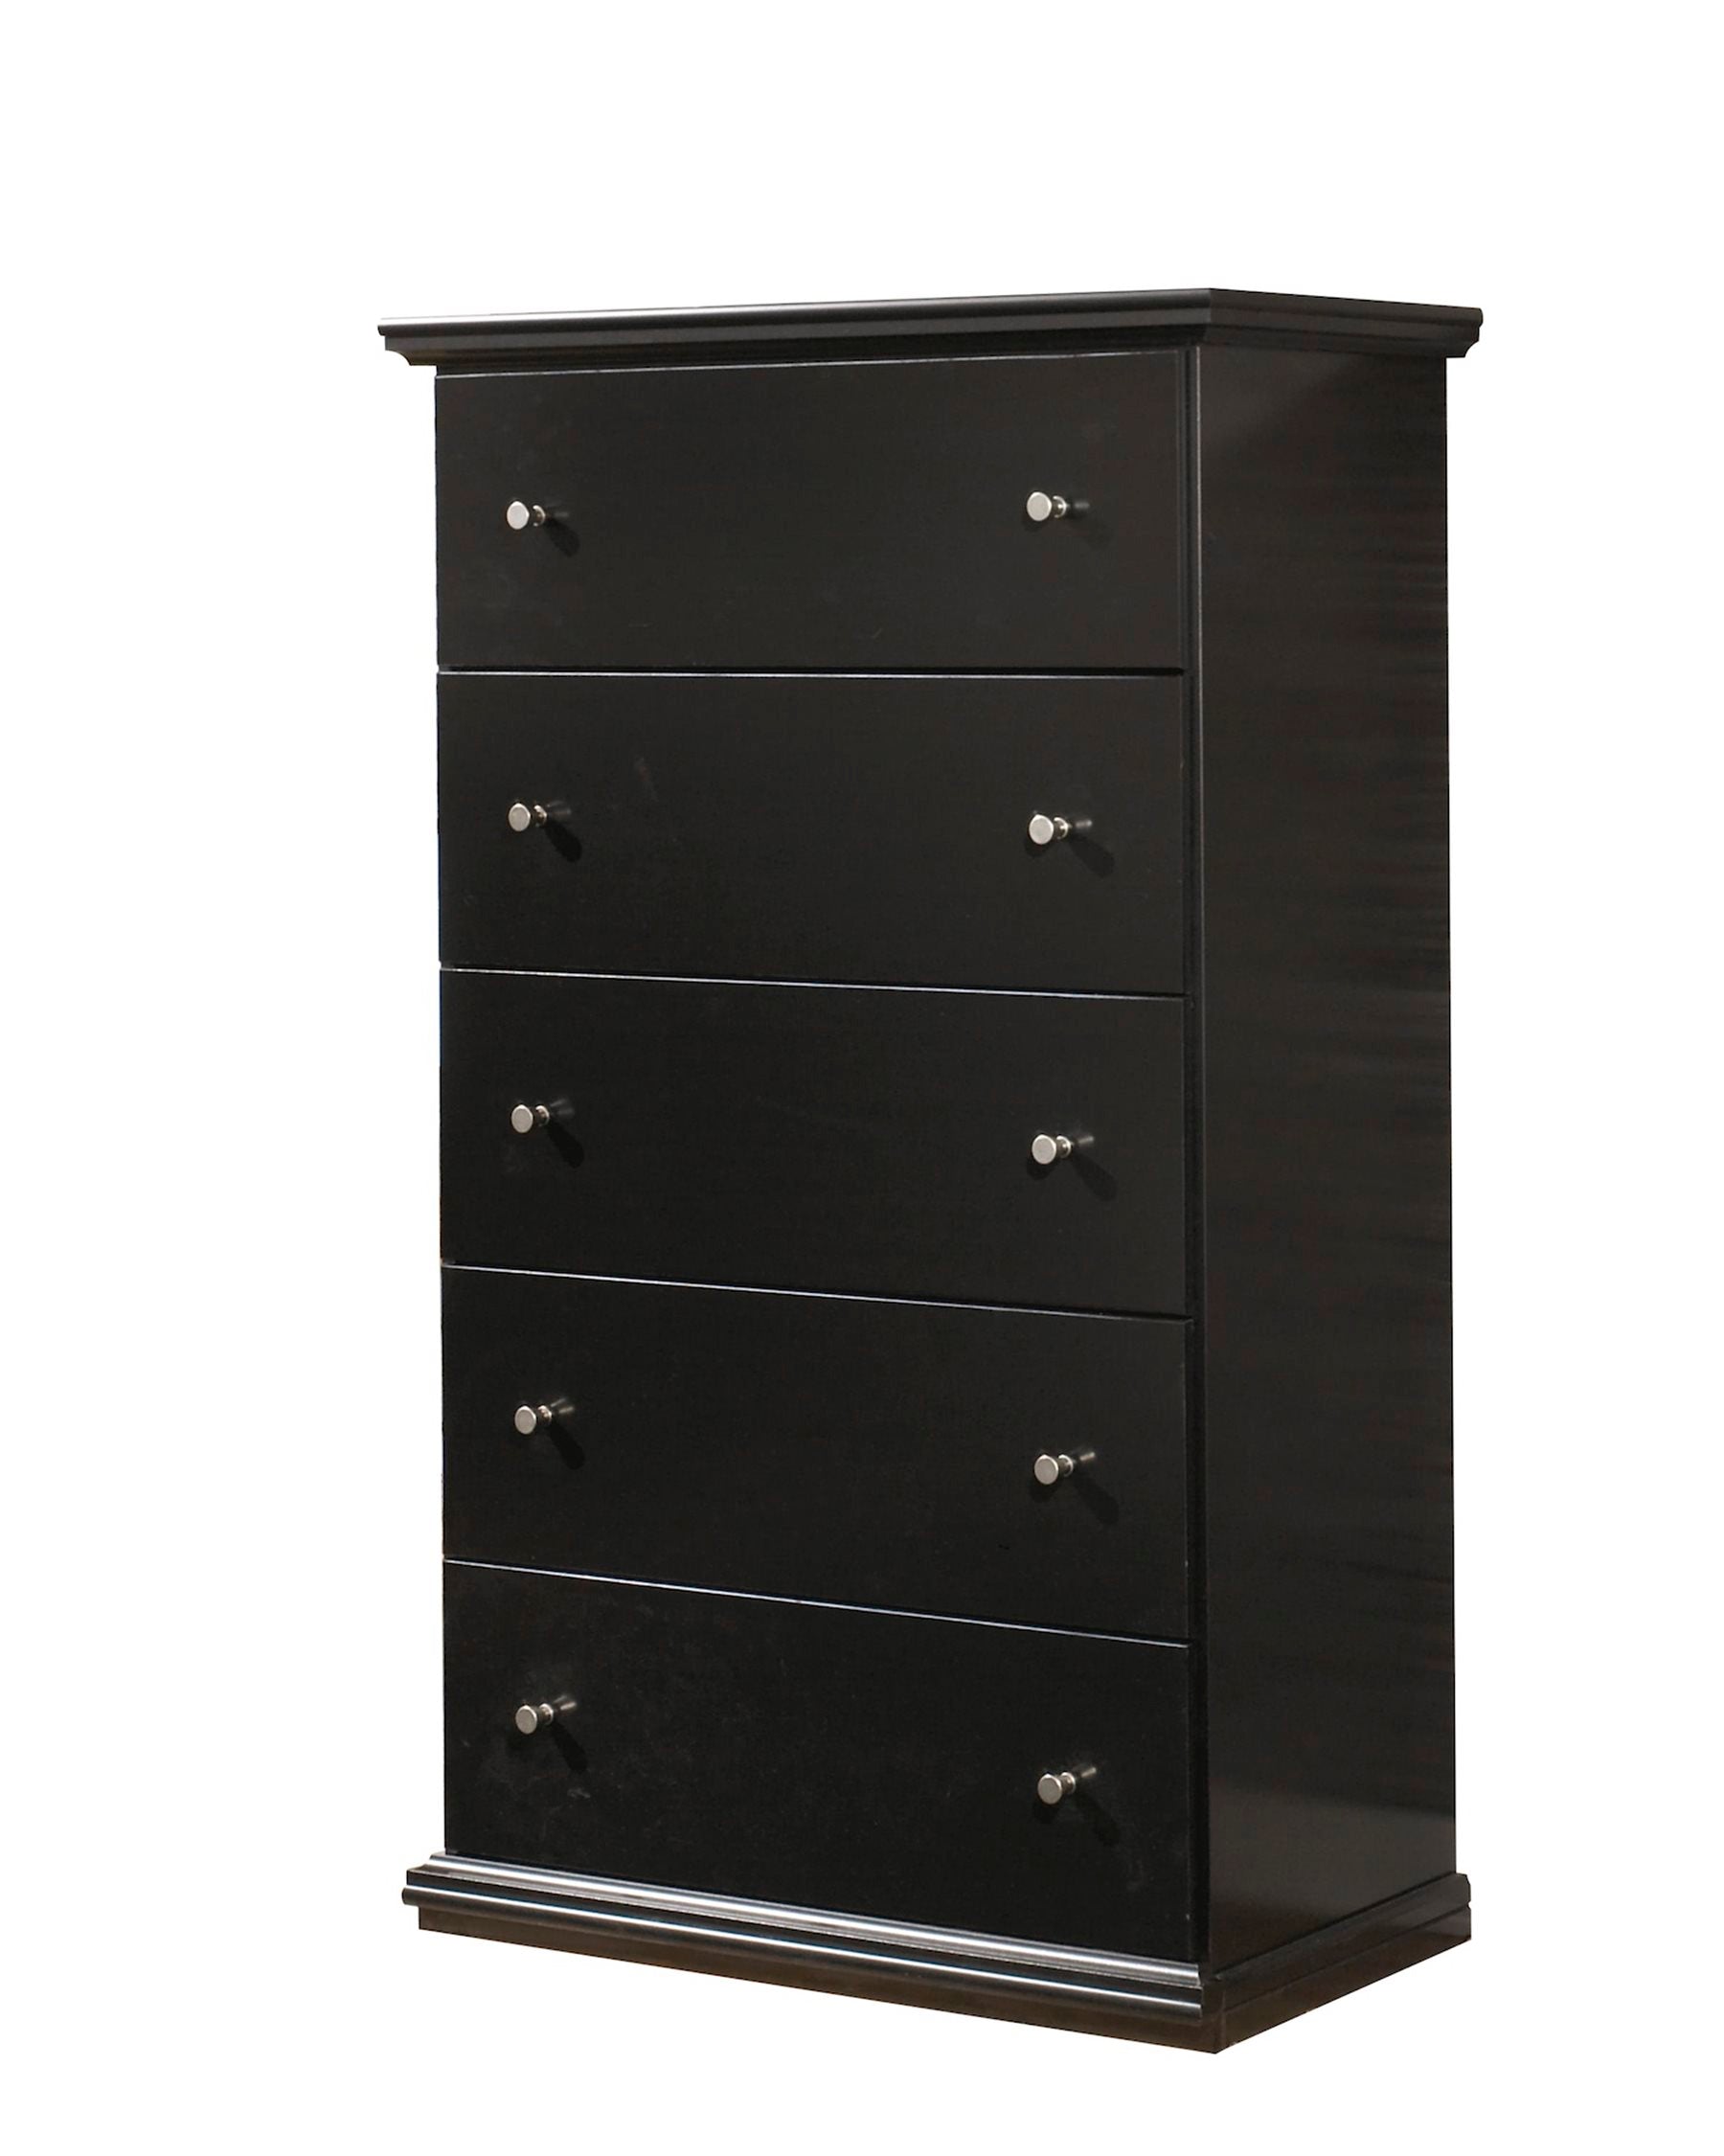 Ashley Maribel Five Drawer Chest in Black - The Furniture Space.